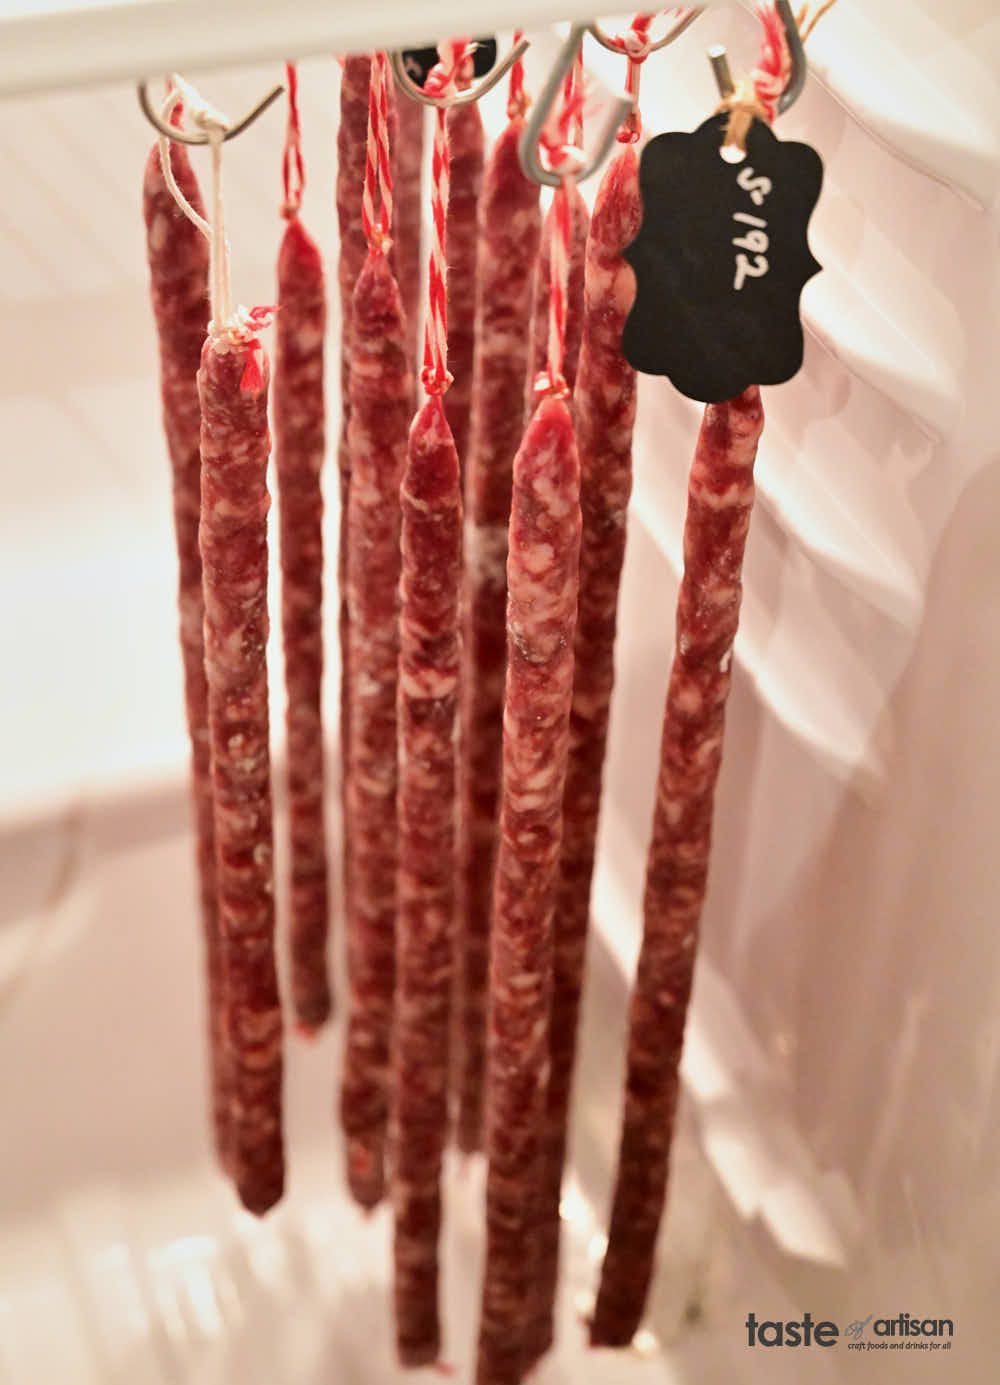 Salami sticks in meat chamber.